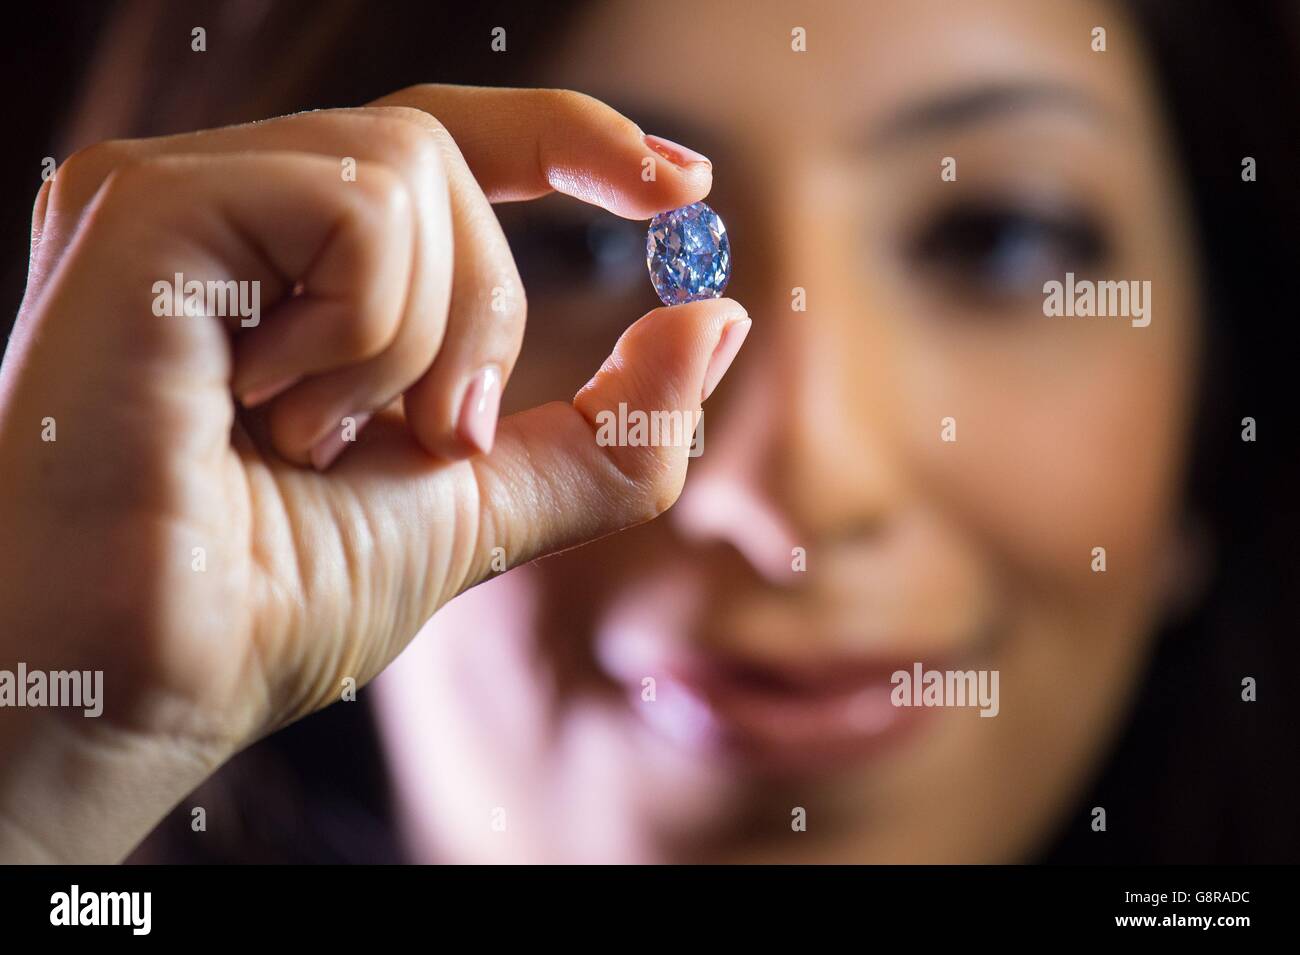 A member of Sotheby's staff holds the De Beers Millennium Jewel, a 10.10 carat 'internally flawless' blue diamond, which is the largest of its type to appear at auction and is estimated to fetch $30 to $35 million when it is sold in Sotheby's Hong Kong Magnificent Jewels and Jadeite Sale on 5 April 2016. Stock Photo